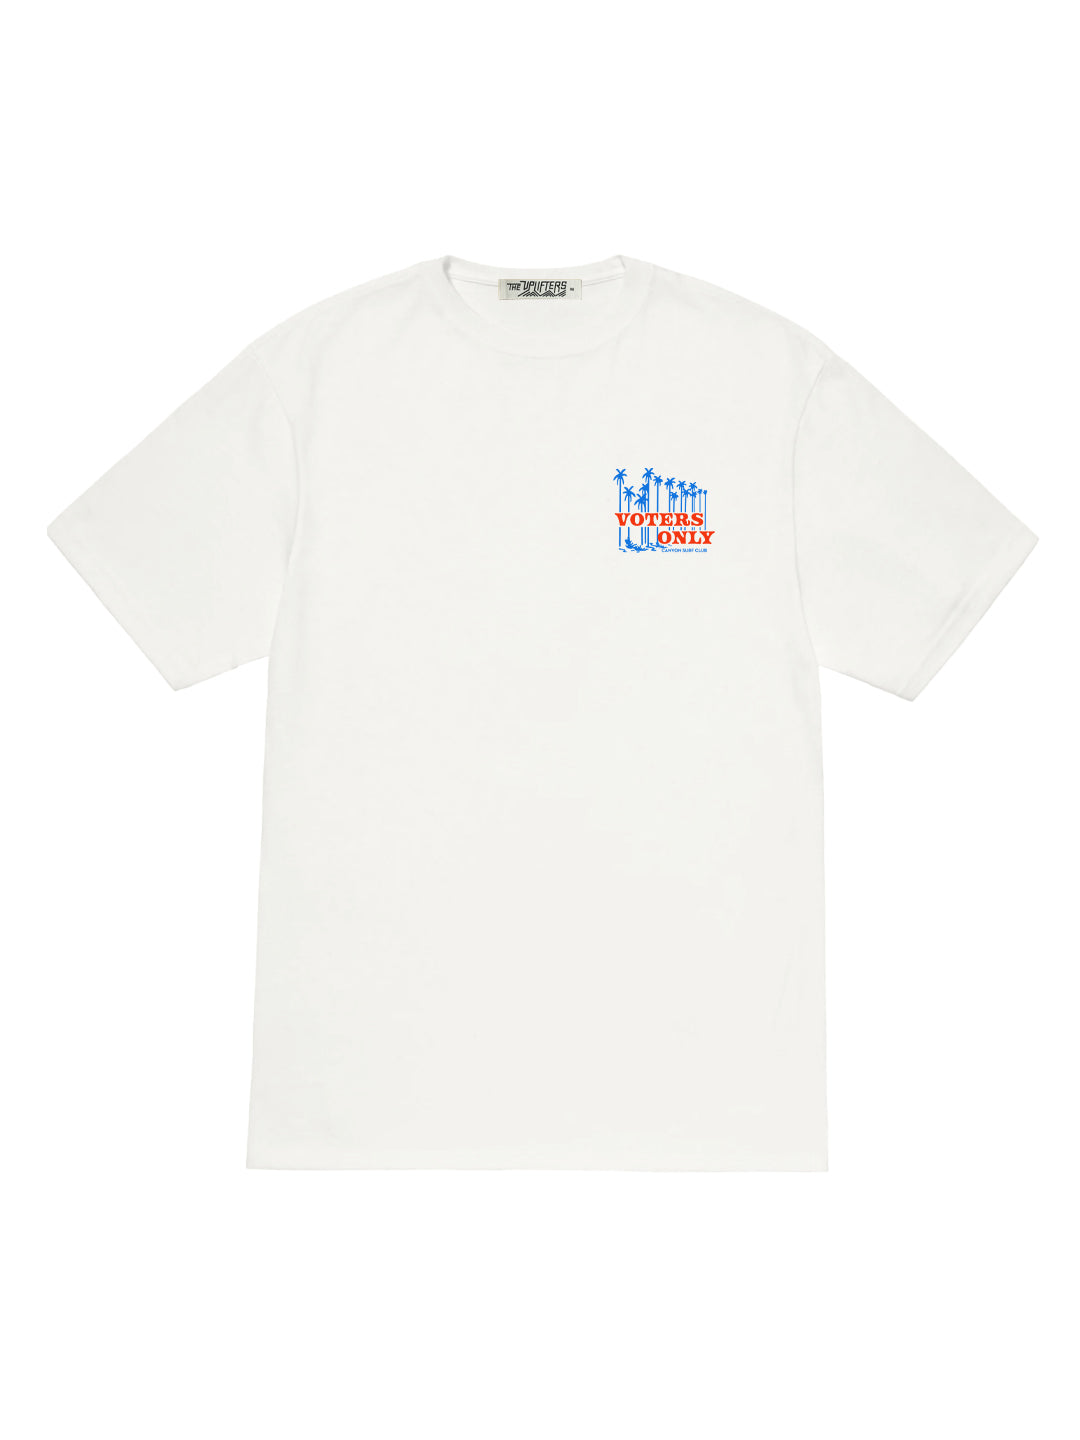 Voters Only Tee